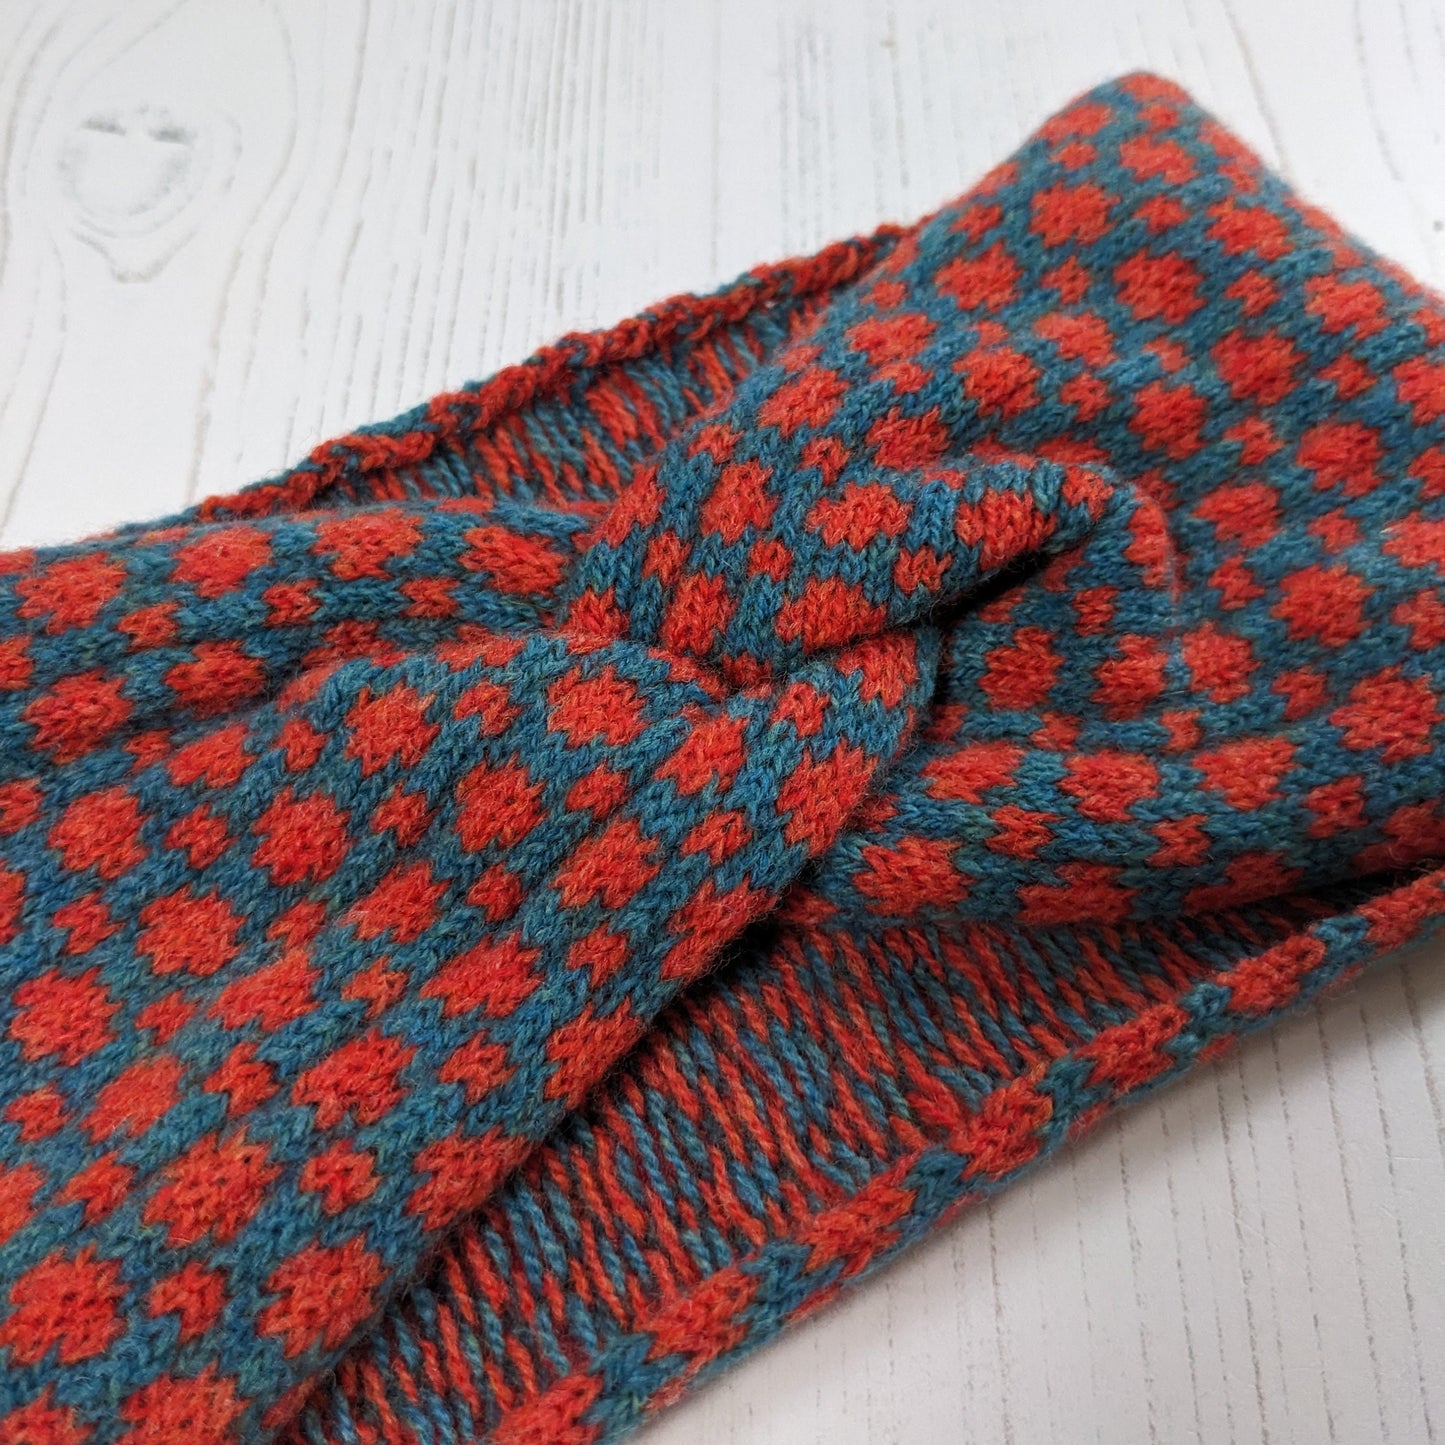 Merino wool ear warmer knitted headband dots and spots design in orange and blue